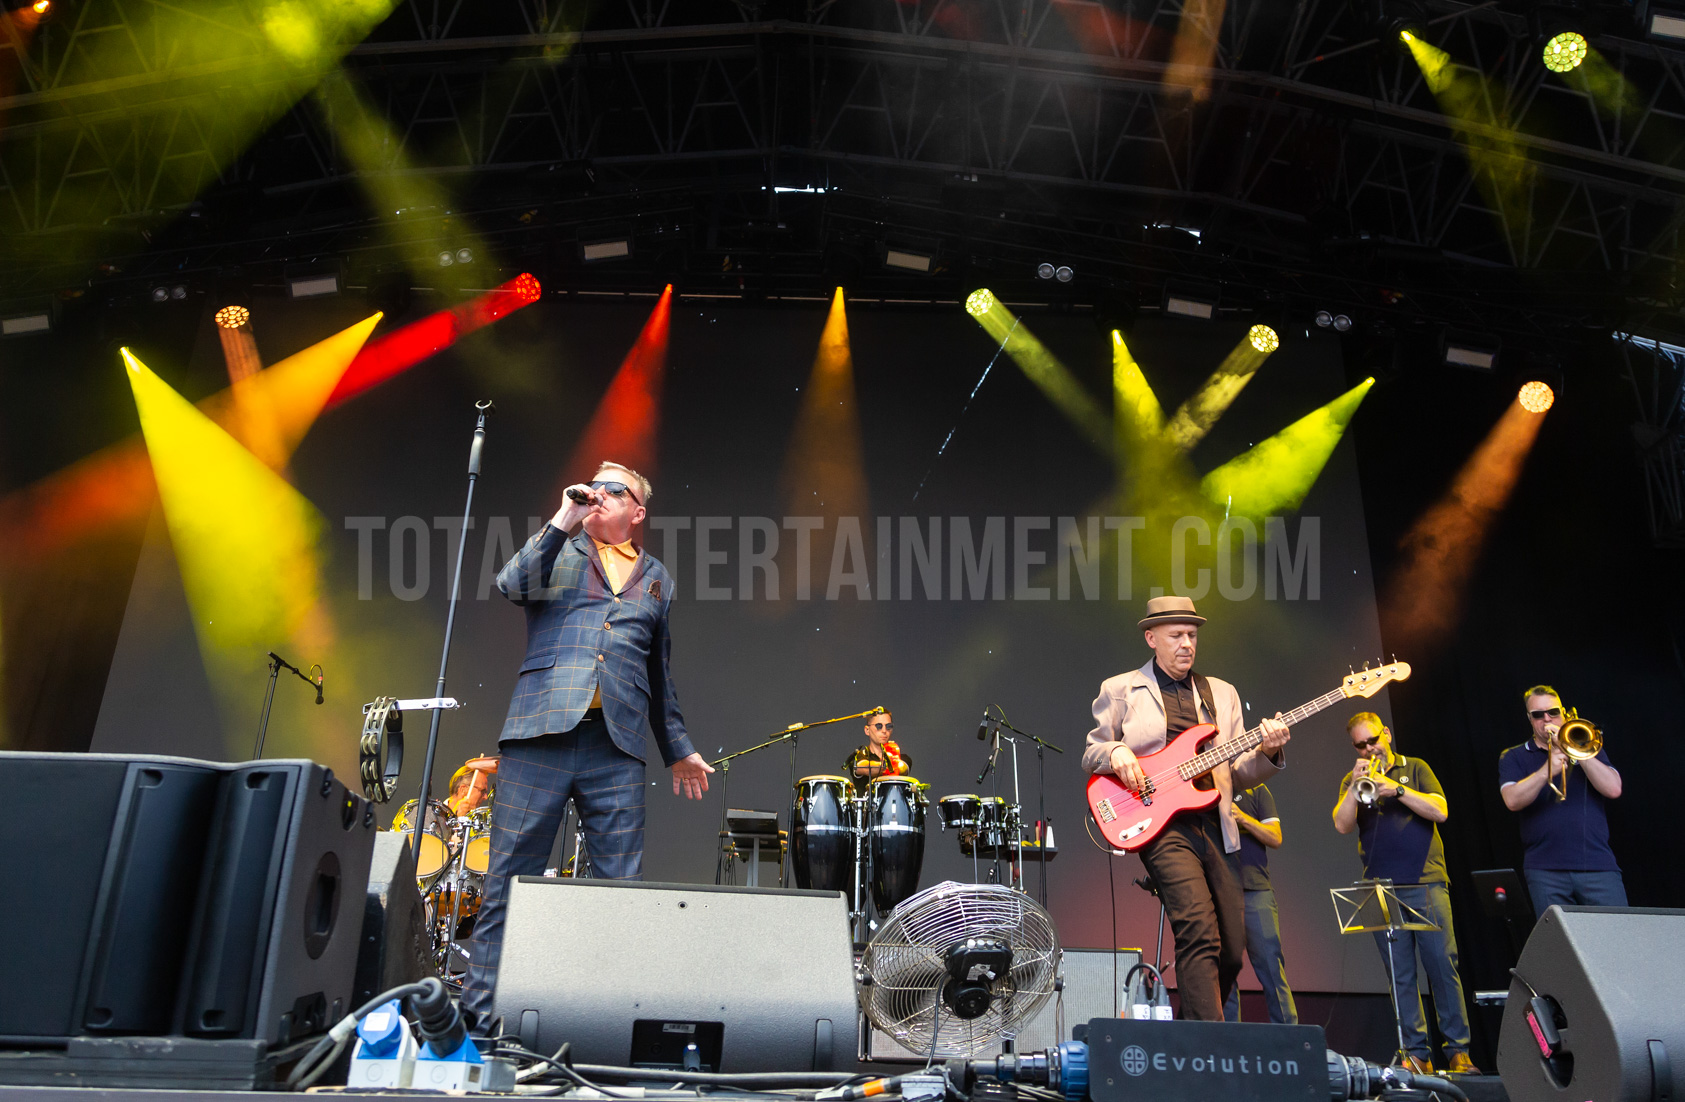 Jo Forrest, Live Event, Music Photography, Totalntertainment, The Piece Hall, Halifax, Music Photography, Madness